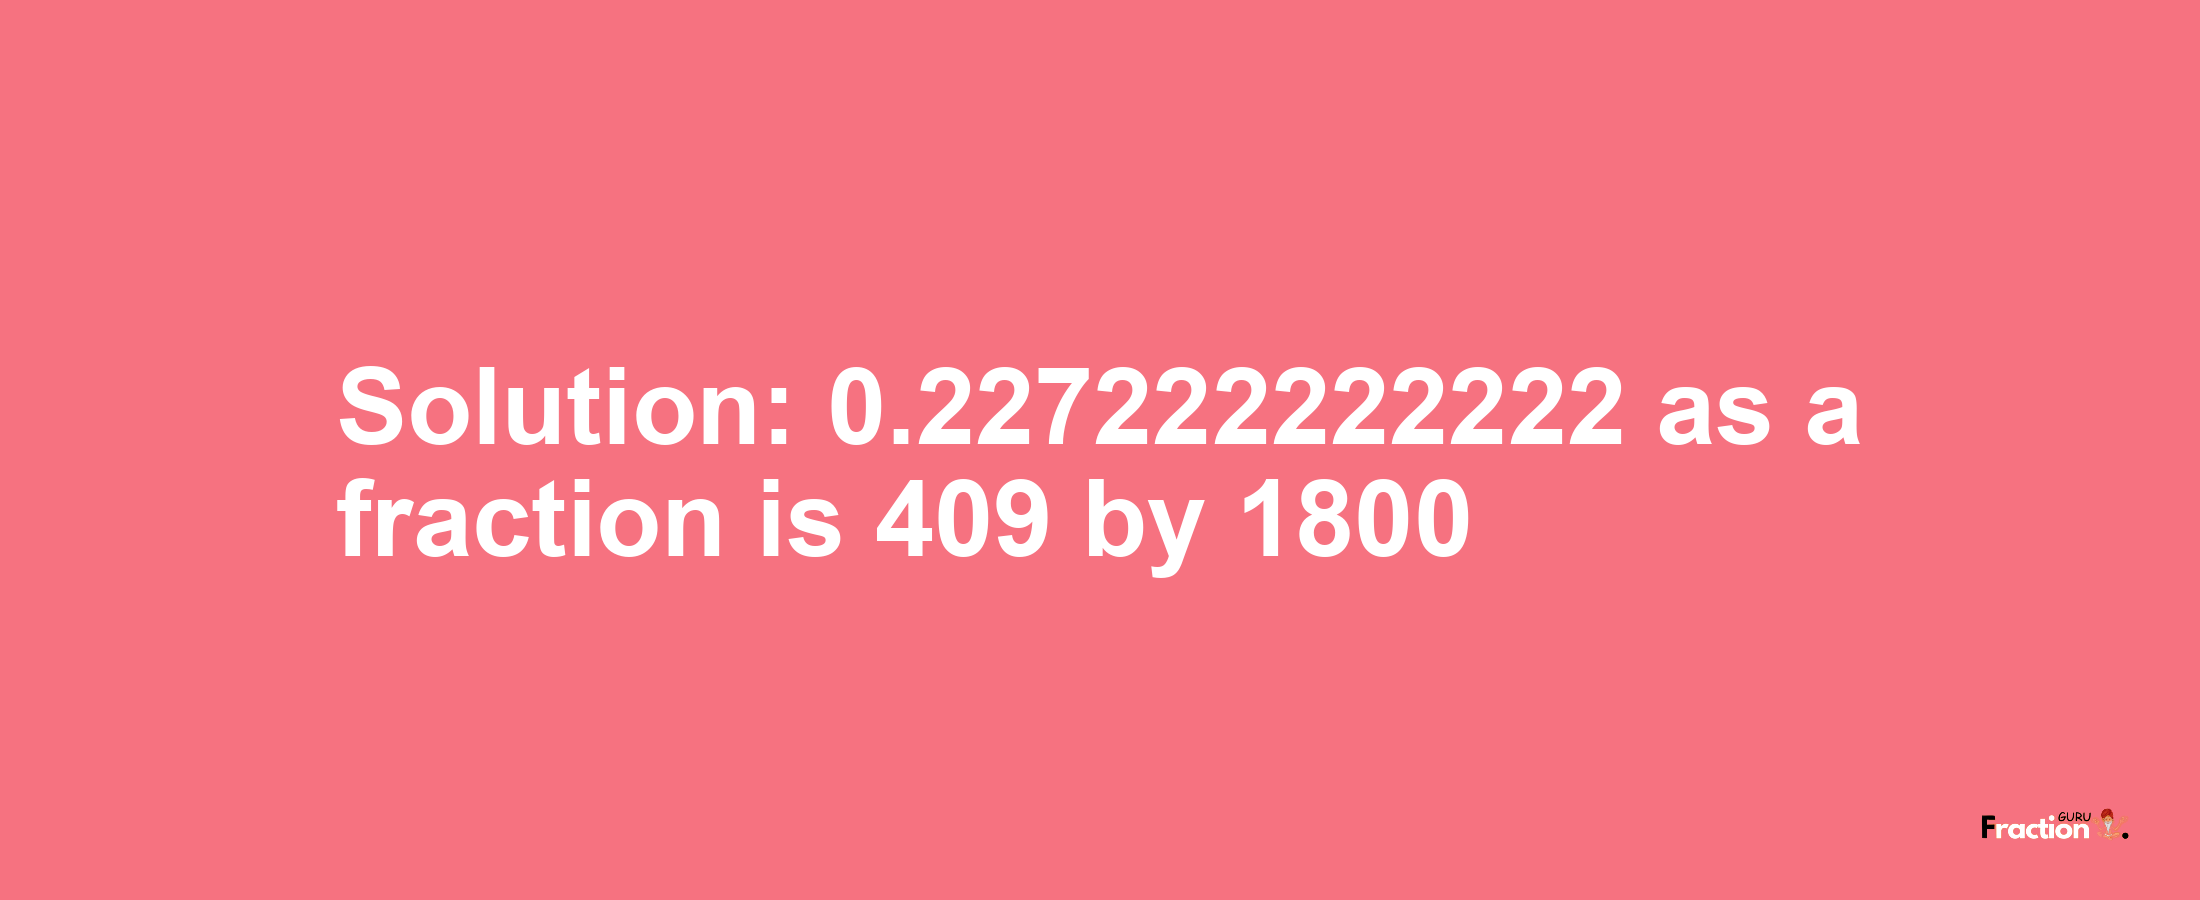 Solution:0.227222222222 as a fraction is 409/1800